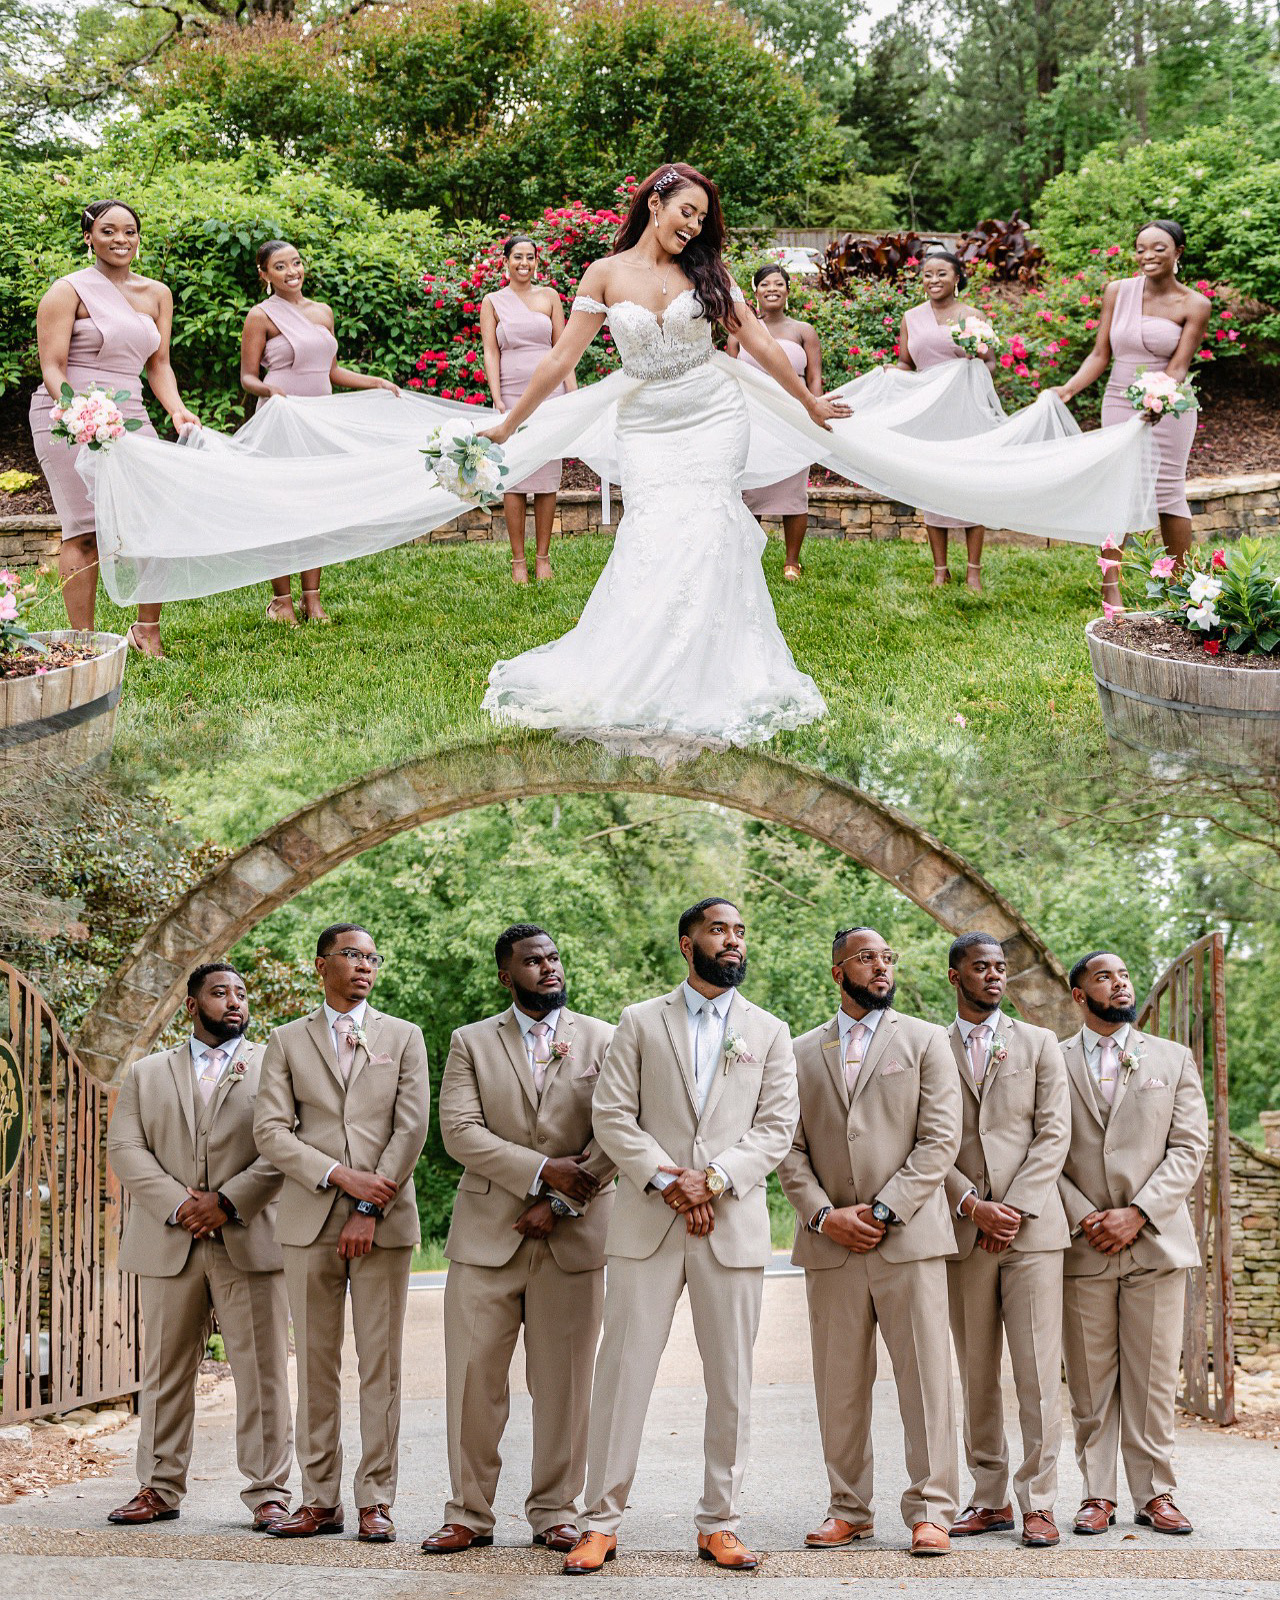 Bridal party photos with Bride and Groom. Groomsmen look sharp in their tux and Bridesmaids look stunning in their royal dress.